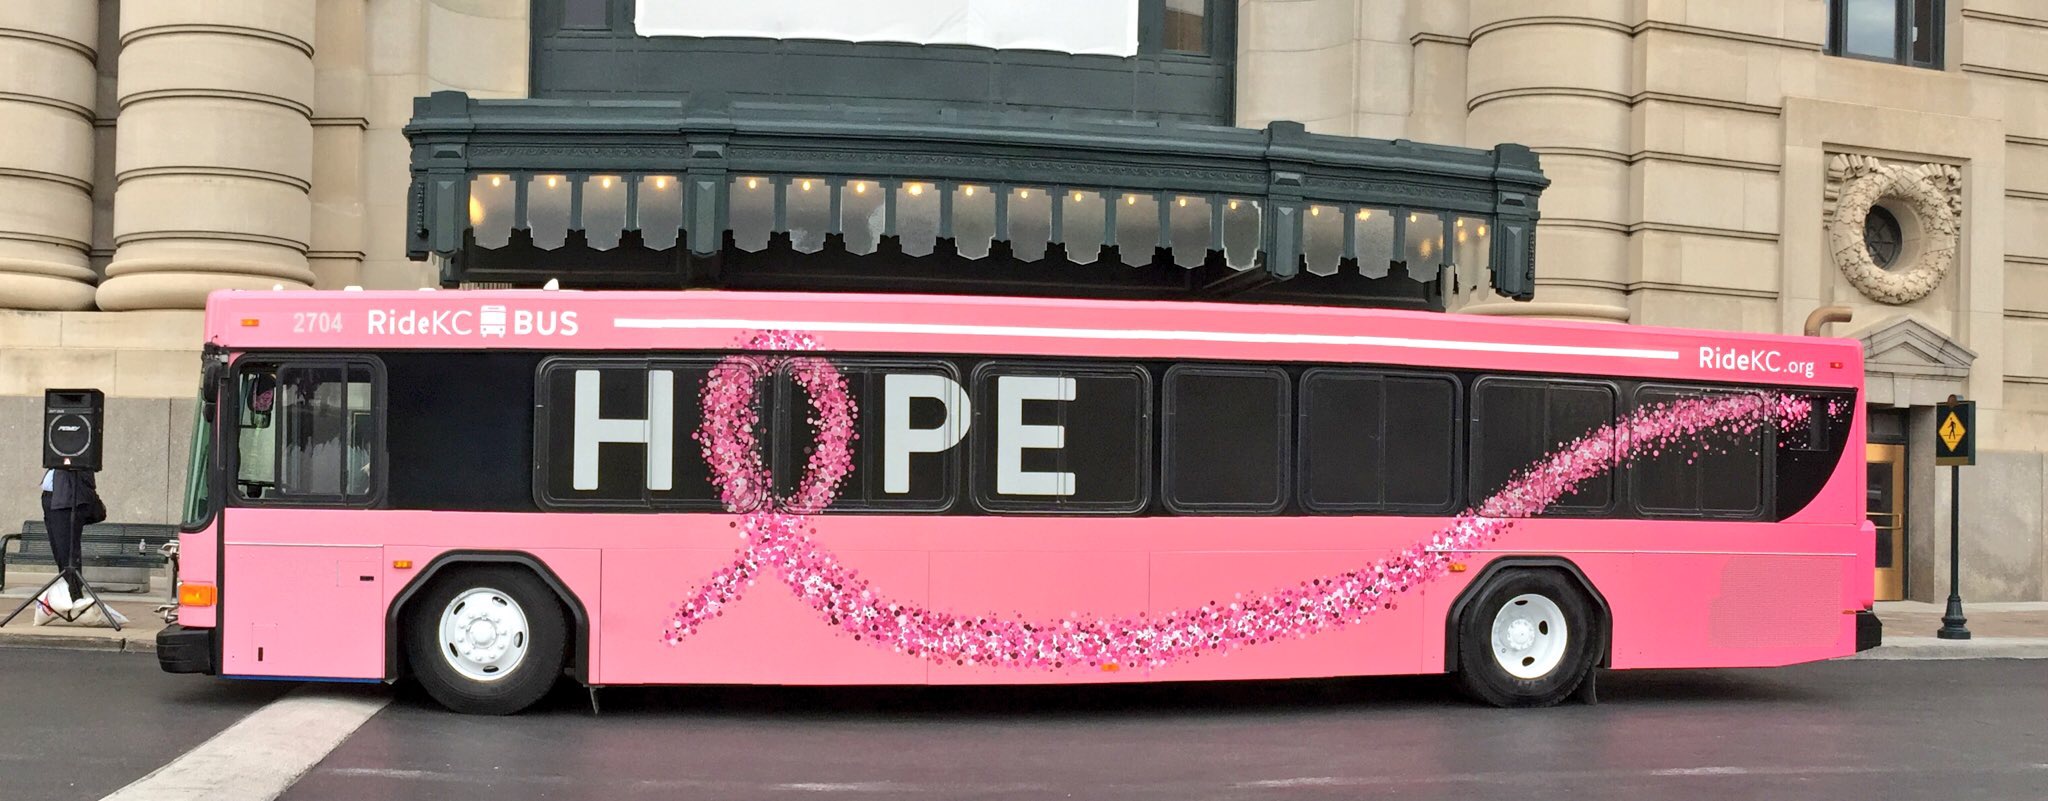 HOPE Breast Cancer Awareness Bus at Union Station